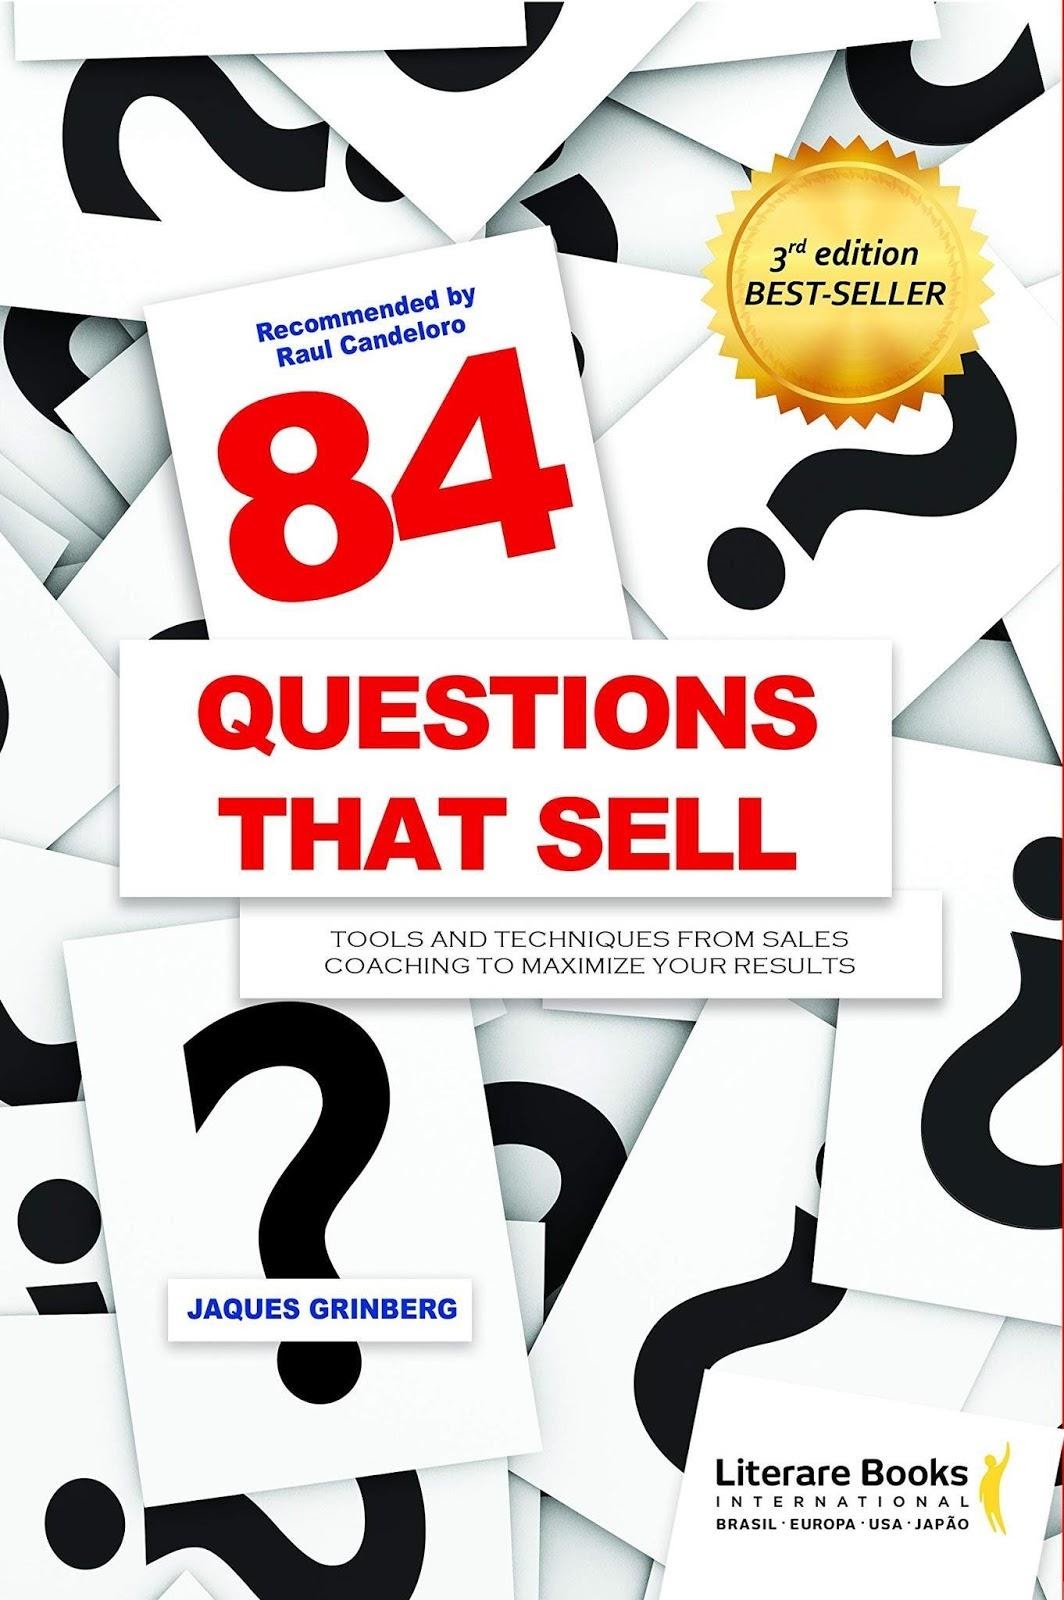 Livre « 84 Questions that sell »